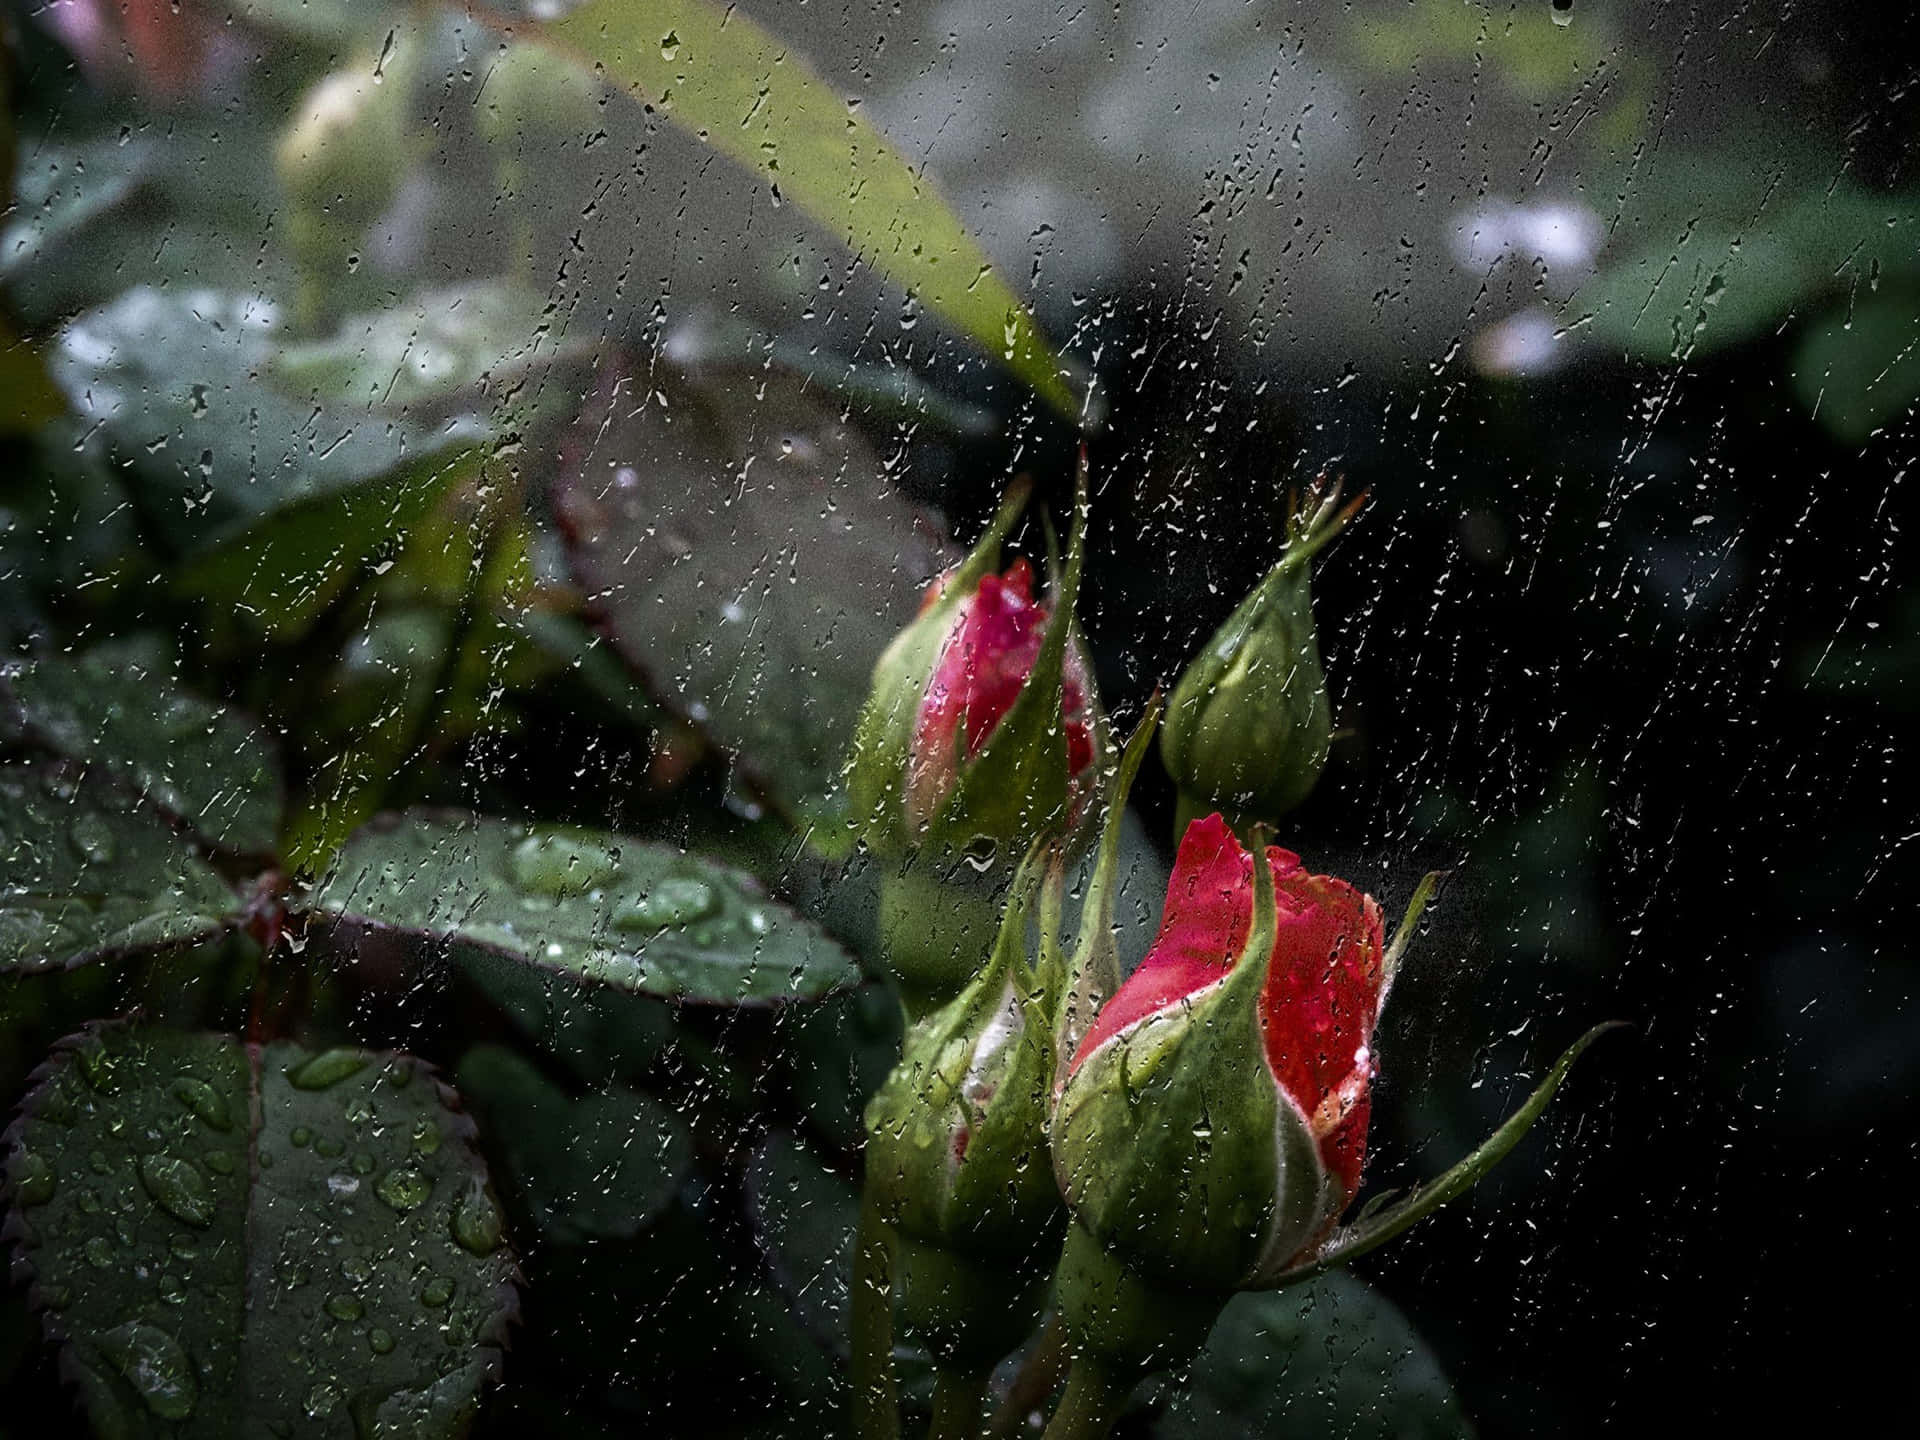 Stunning Rose Drenched in Raindrops Wallpaper